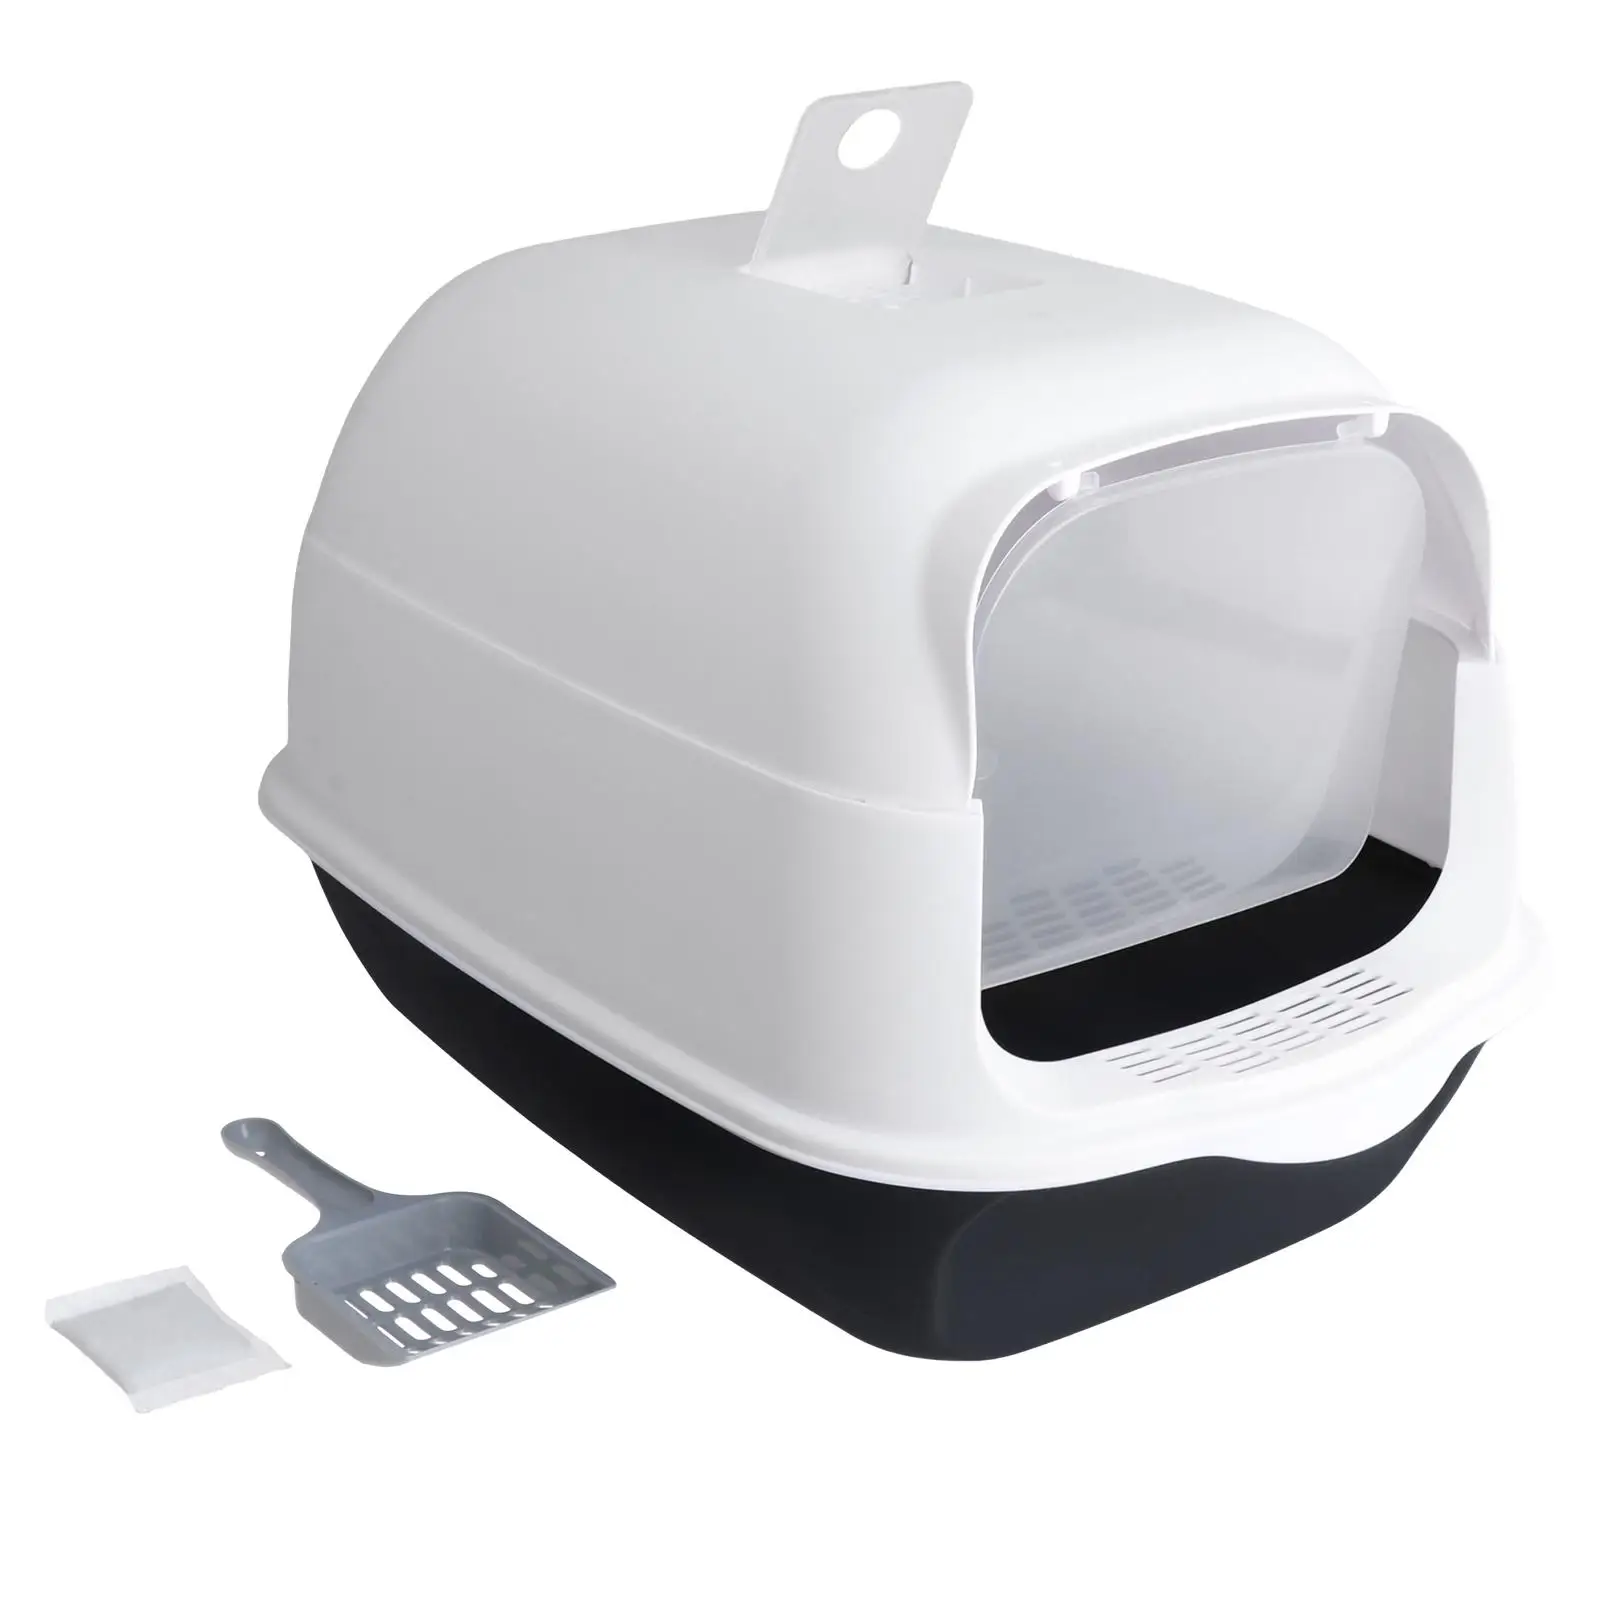 Hooded Cat Litter Box with Lid Enclosed Cat Toilet with Front Door Flap Anti Splashing Portable Urine Litter Box Pet Litter Box